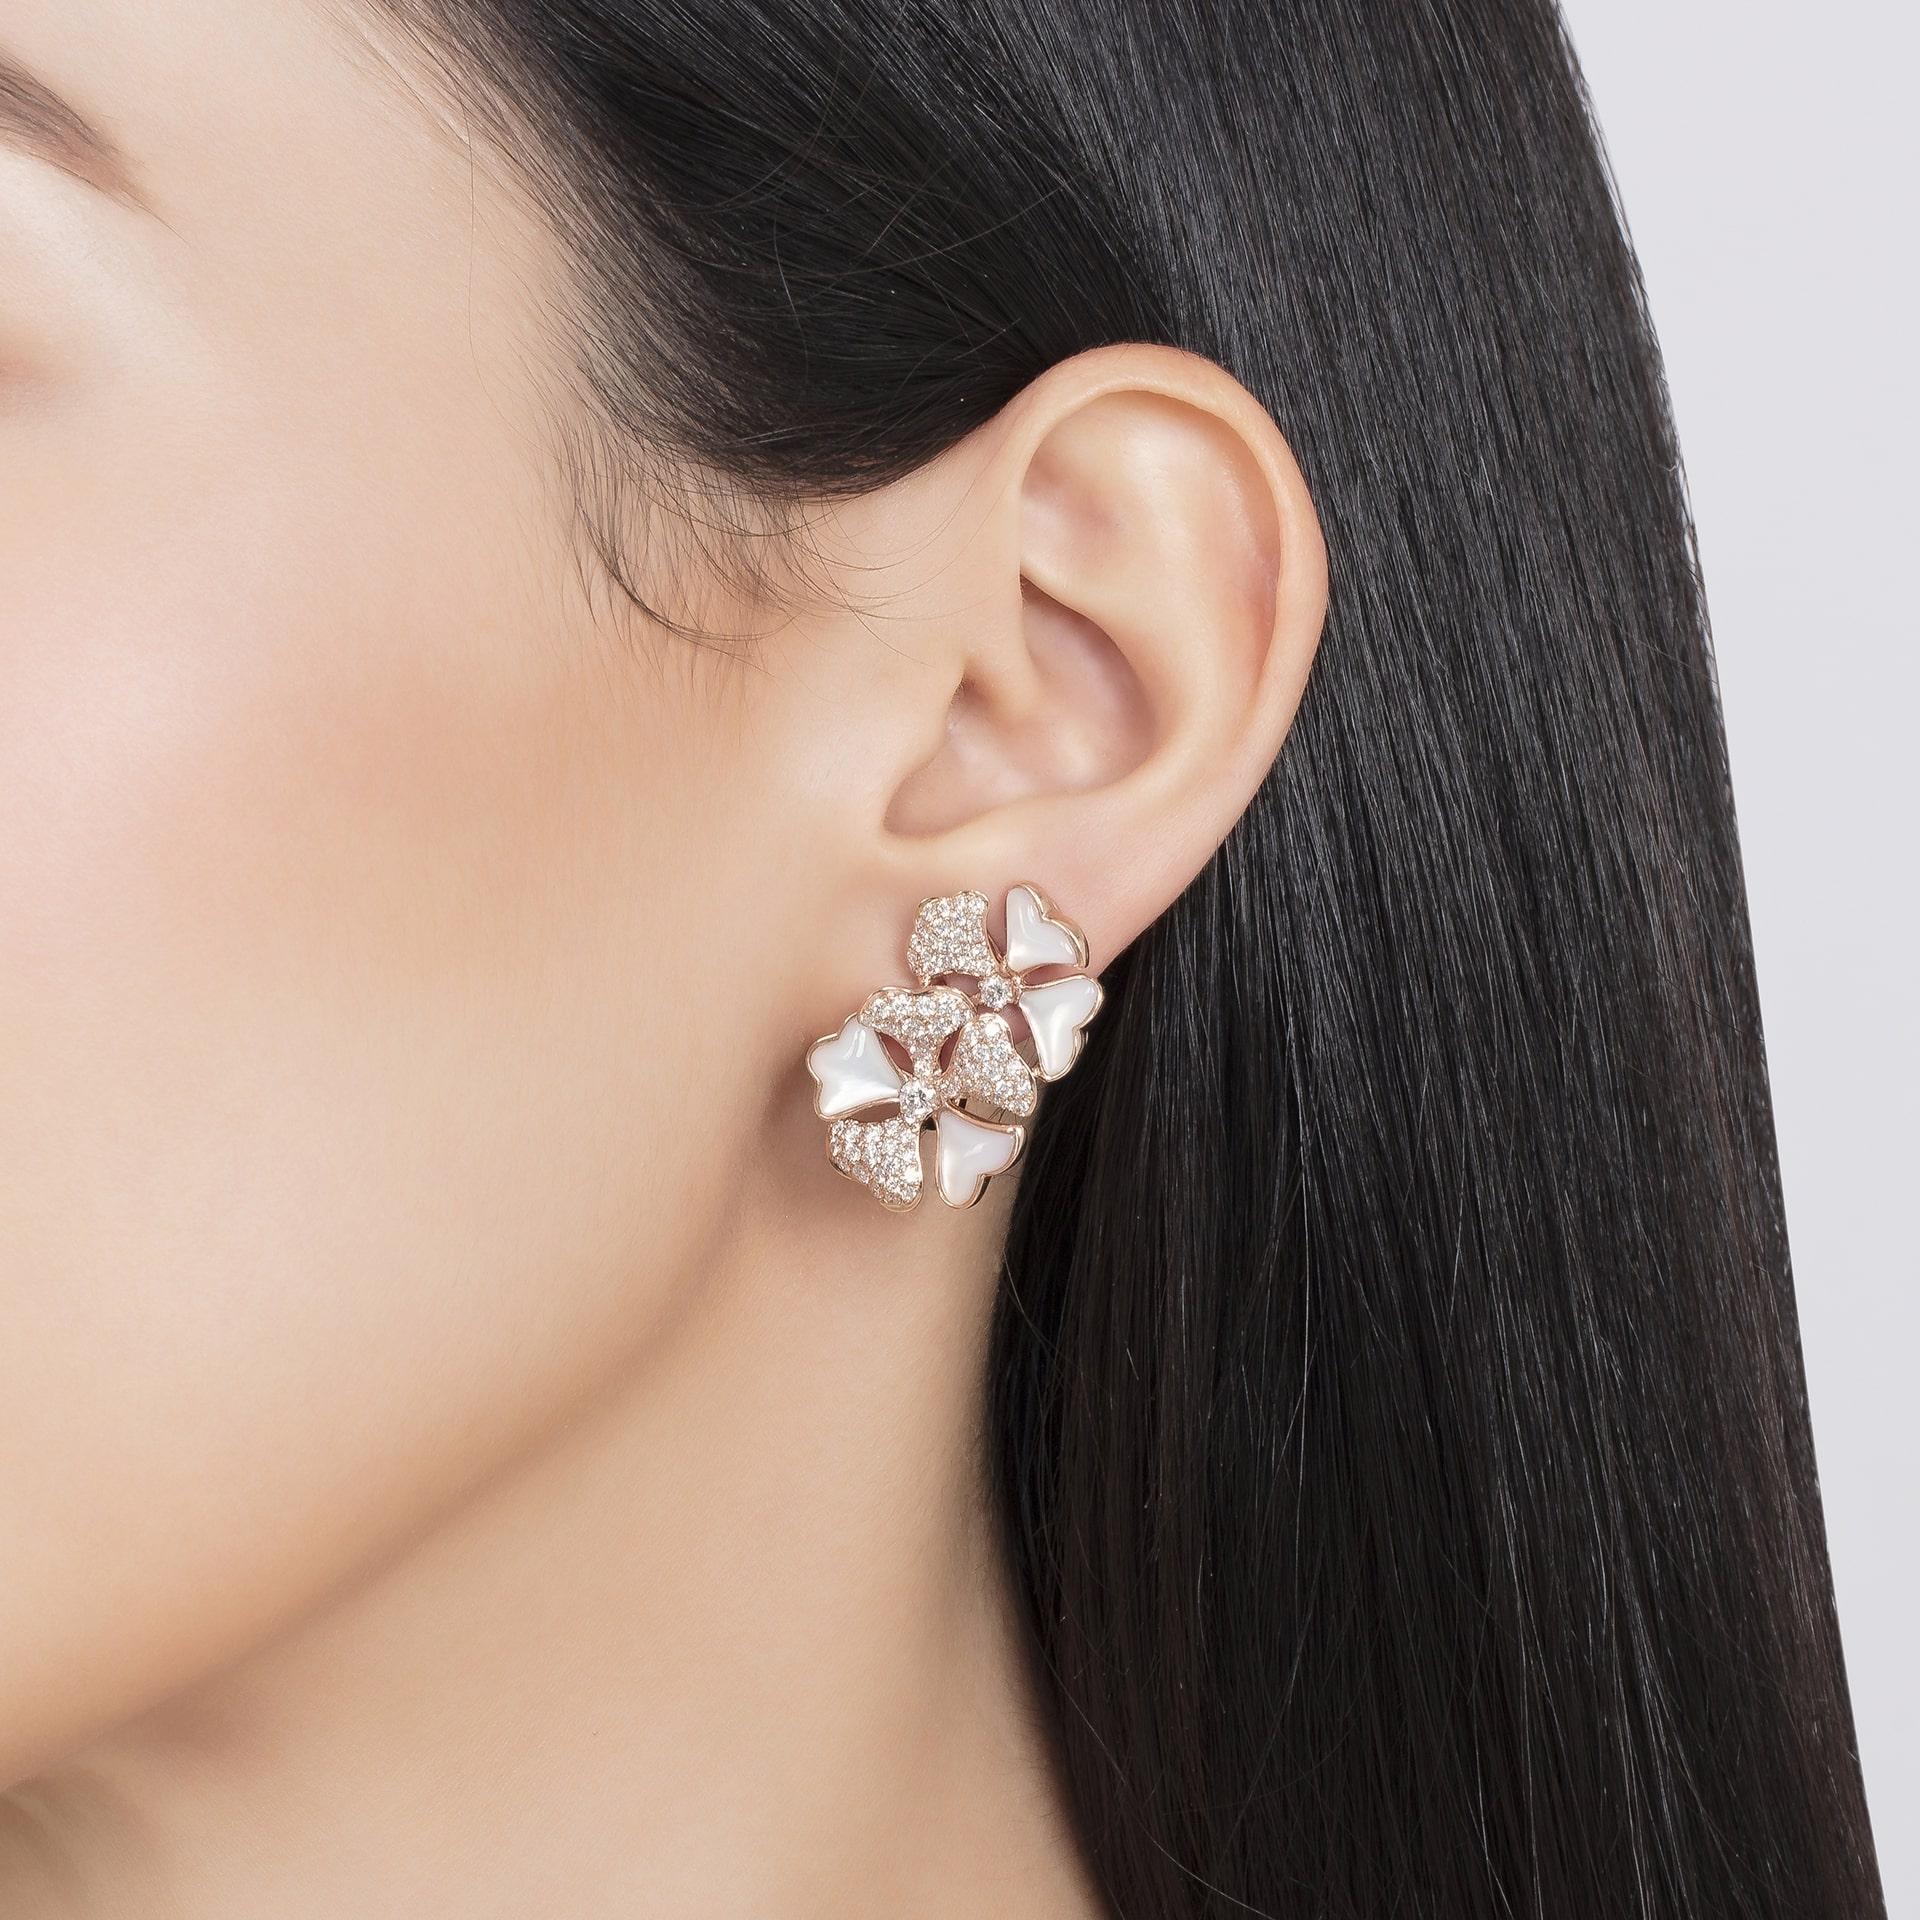 Bloom Diamond and White Mother-of-Pearl Cluster Earrings in 18K Rose Gold

Inspired by the exquisite petals of the alpine cinquefoil, the Bloom collection contrasts the richness of diamonds and precious metals with the light versatility of this